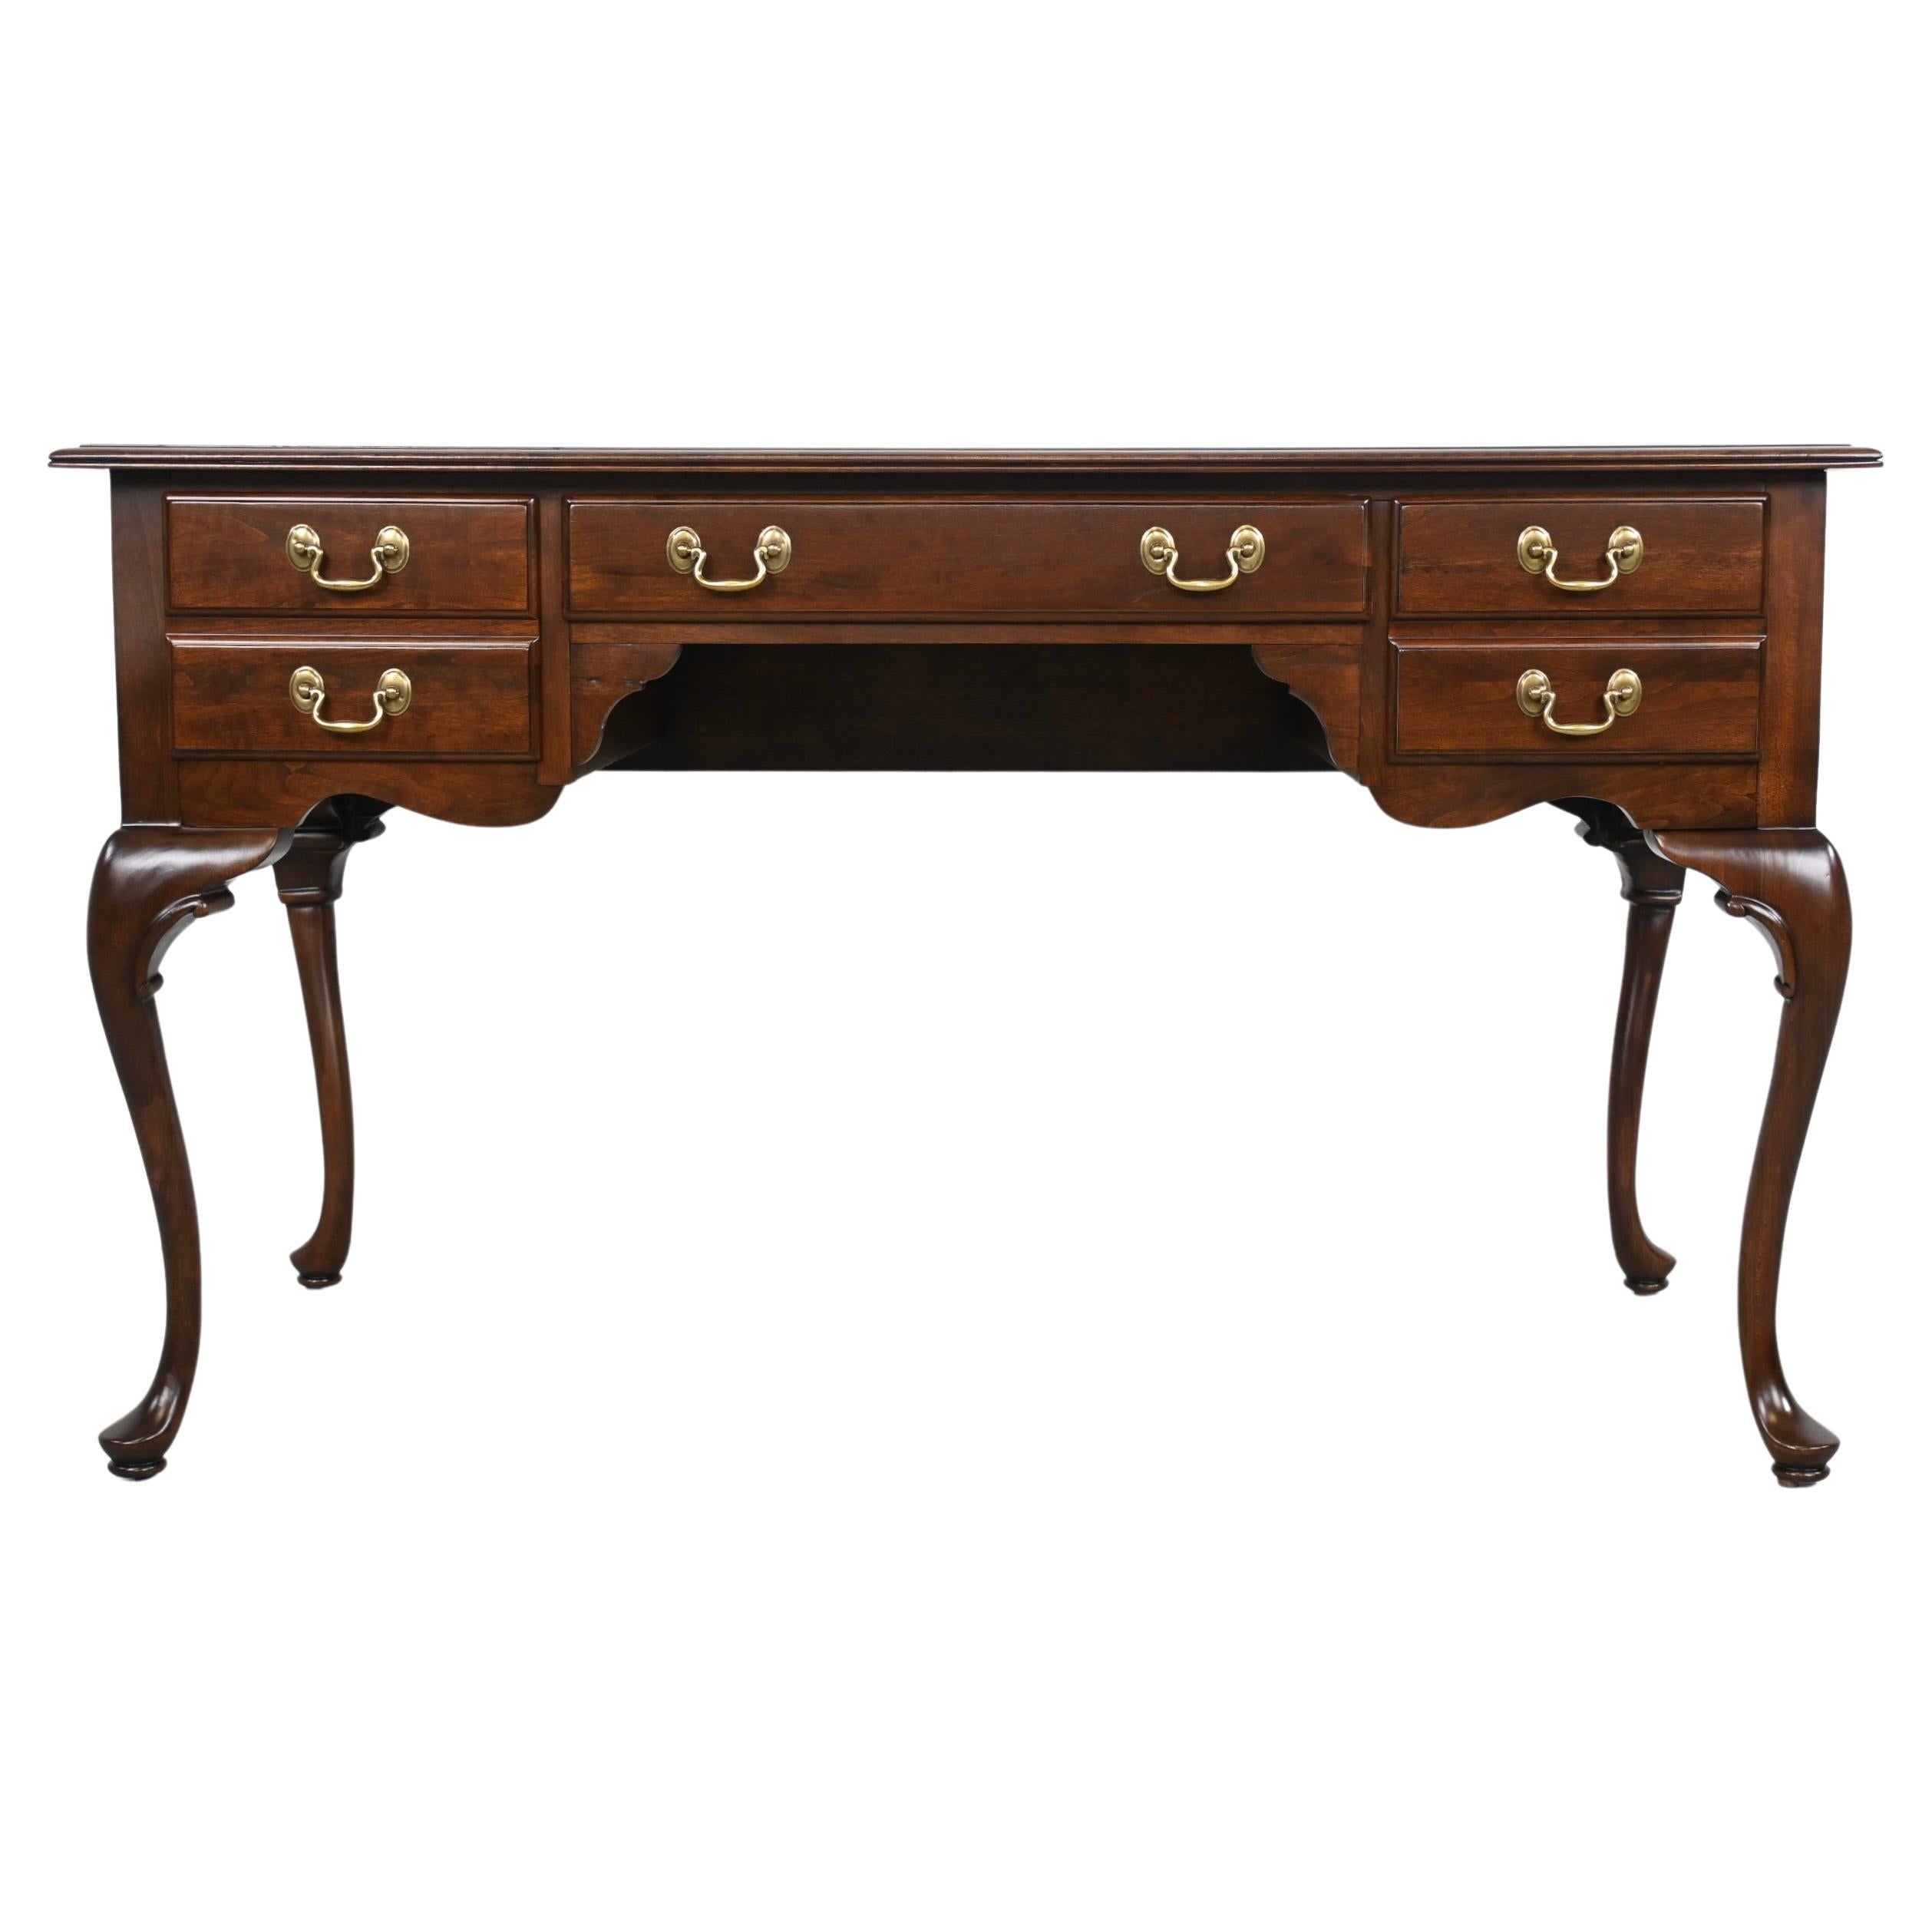 Queen Anne Mahogany Kneehole Desk For Sale at 1stDibs